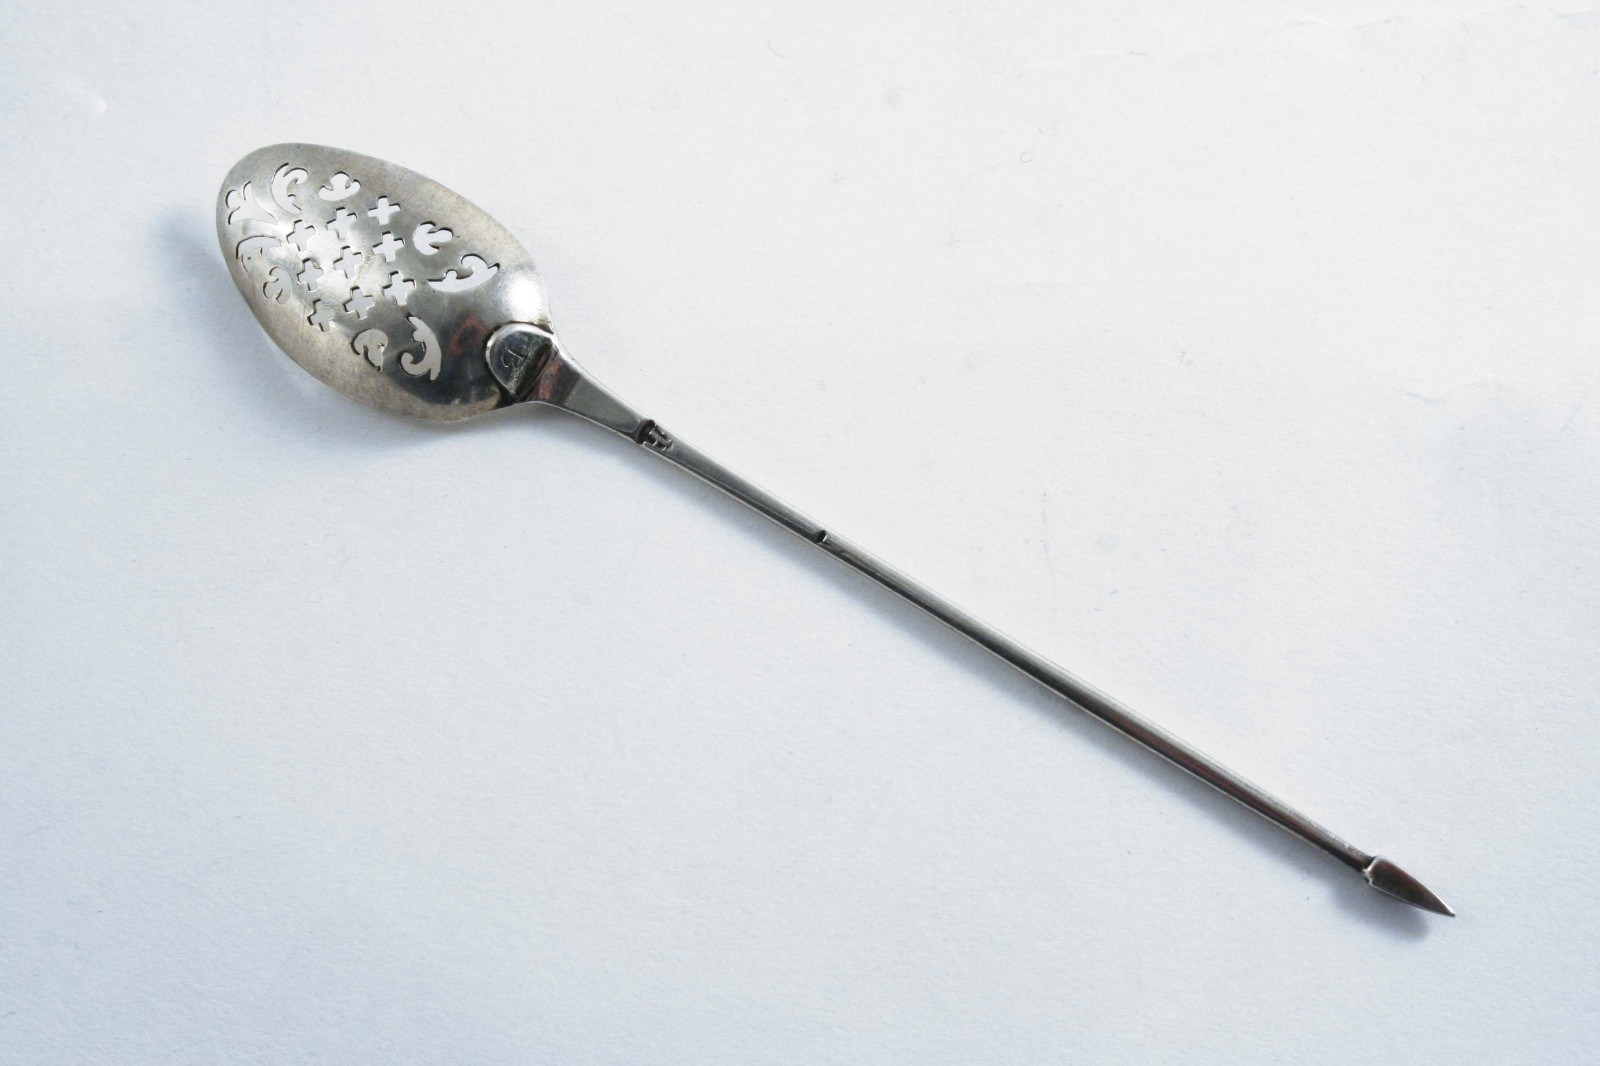 A GEORGE III MOTE SPOON with a diamond-point finial, a single drop, initialled "B", the bowl pierced